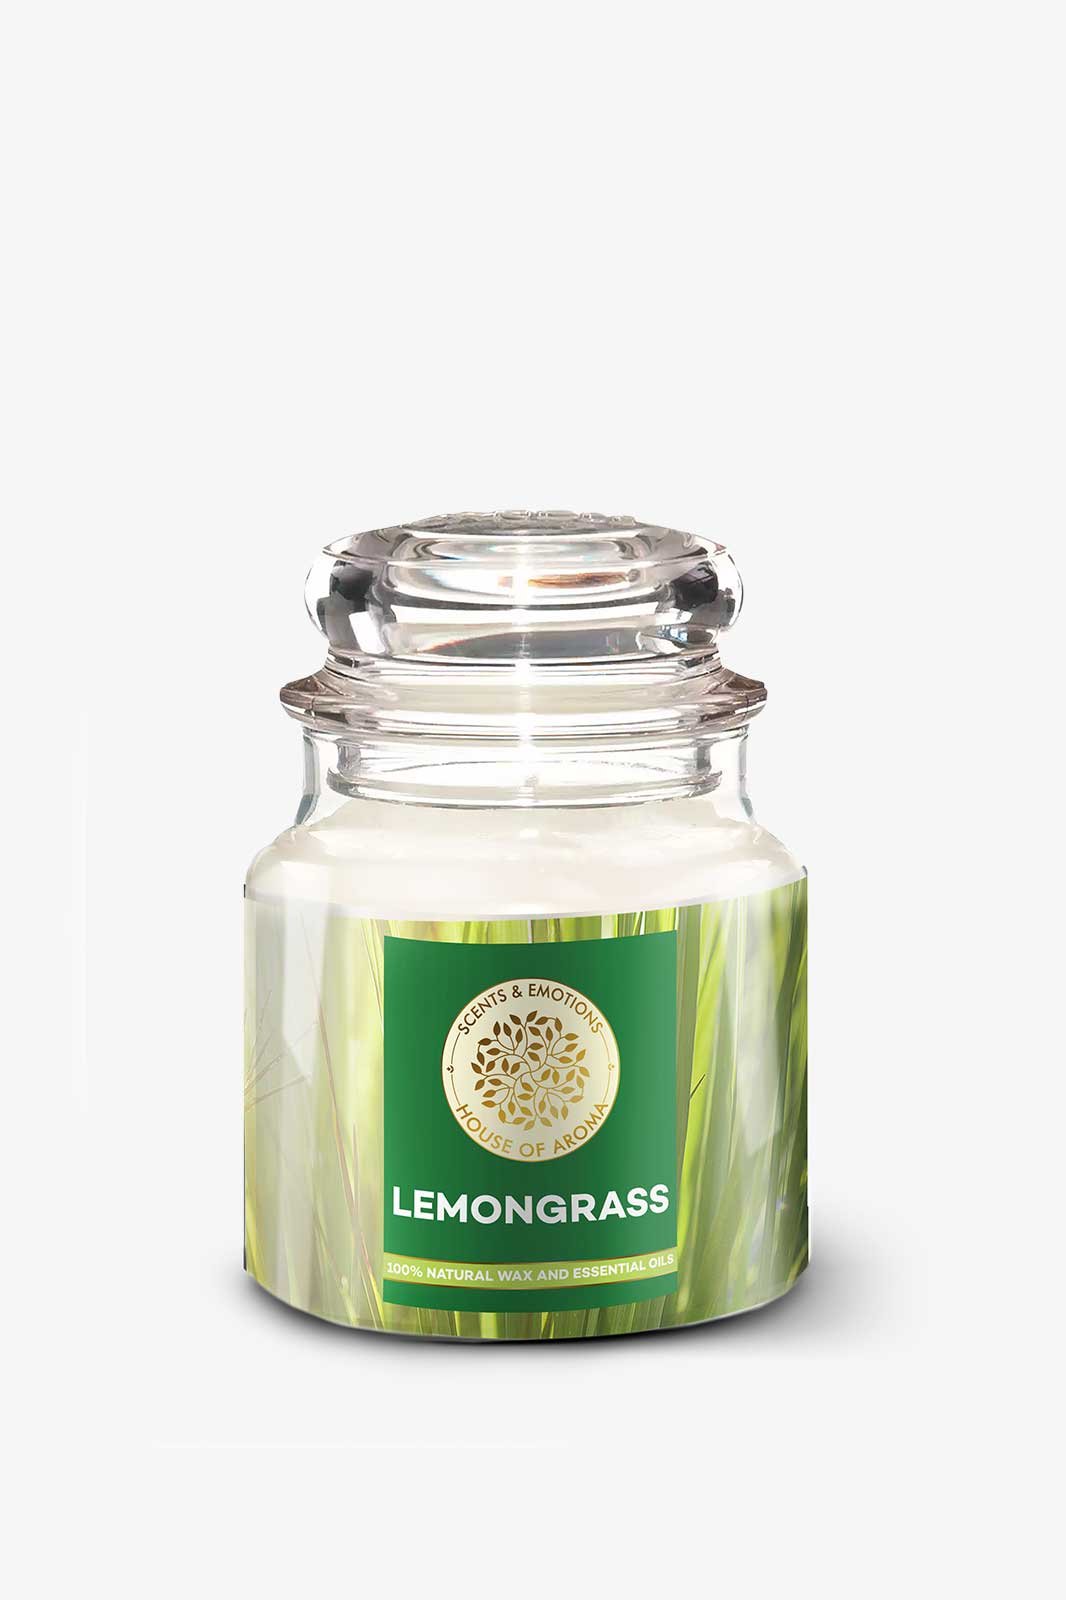 lemongrass natural scented candle, best lemongrass scented candle, lemongrass scent candle, lemongrass candle scent, lemongrass candles, lemongrass candle fragrance, lemongrass wax candles, lemongrass candle scent, lemongrass beeswax candle, lemongrass candle woodwick, lemongrass scented candle benefits, lemongrass pillar candle, lemongrass fragrance scent, lemongrass candle blend, lemongrass scent benefits, lemongrass home scent, lemongrass soy candles, best lemongrass candles, natural scented candles, natural scents for candles, organic scented candles India, luxury scented candles India, natural soy candle wax, natural fragrance for candles, natural soy candle company, best scented candles India, scented candles for bedroom, organic, scented candles India, most fragrant scented candles, glass jar candles, bell jar candles, bell jar candle, bell jar candle India, essential oil wax candle, soy wax essential oil candles, essential oil wax candles, natural scented candle brands, scented candles best brand, candle brands in India, organic scented candles India, best scented candle brands in India, top candle brands in India, best candle brands in the world, bedroom candles, room fragrance candles, best bedroom candles, best room scented candles, room freshener candles, beeswax candles, beeswax candles scented, beeswax candles jar